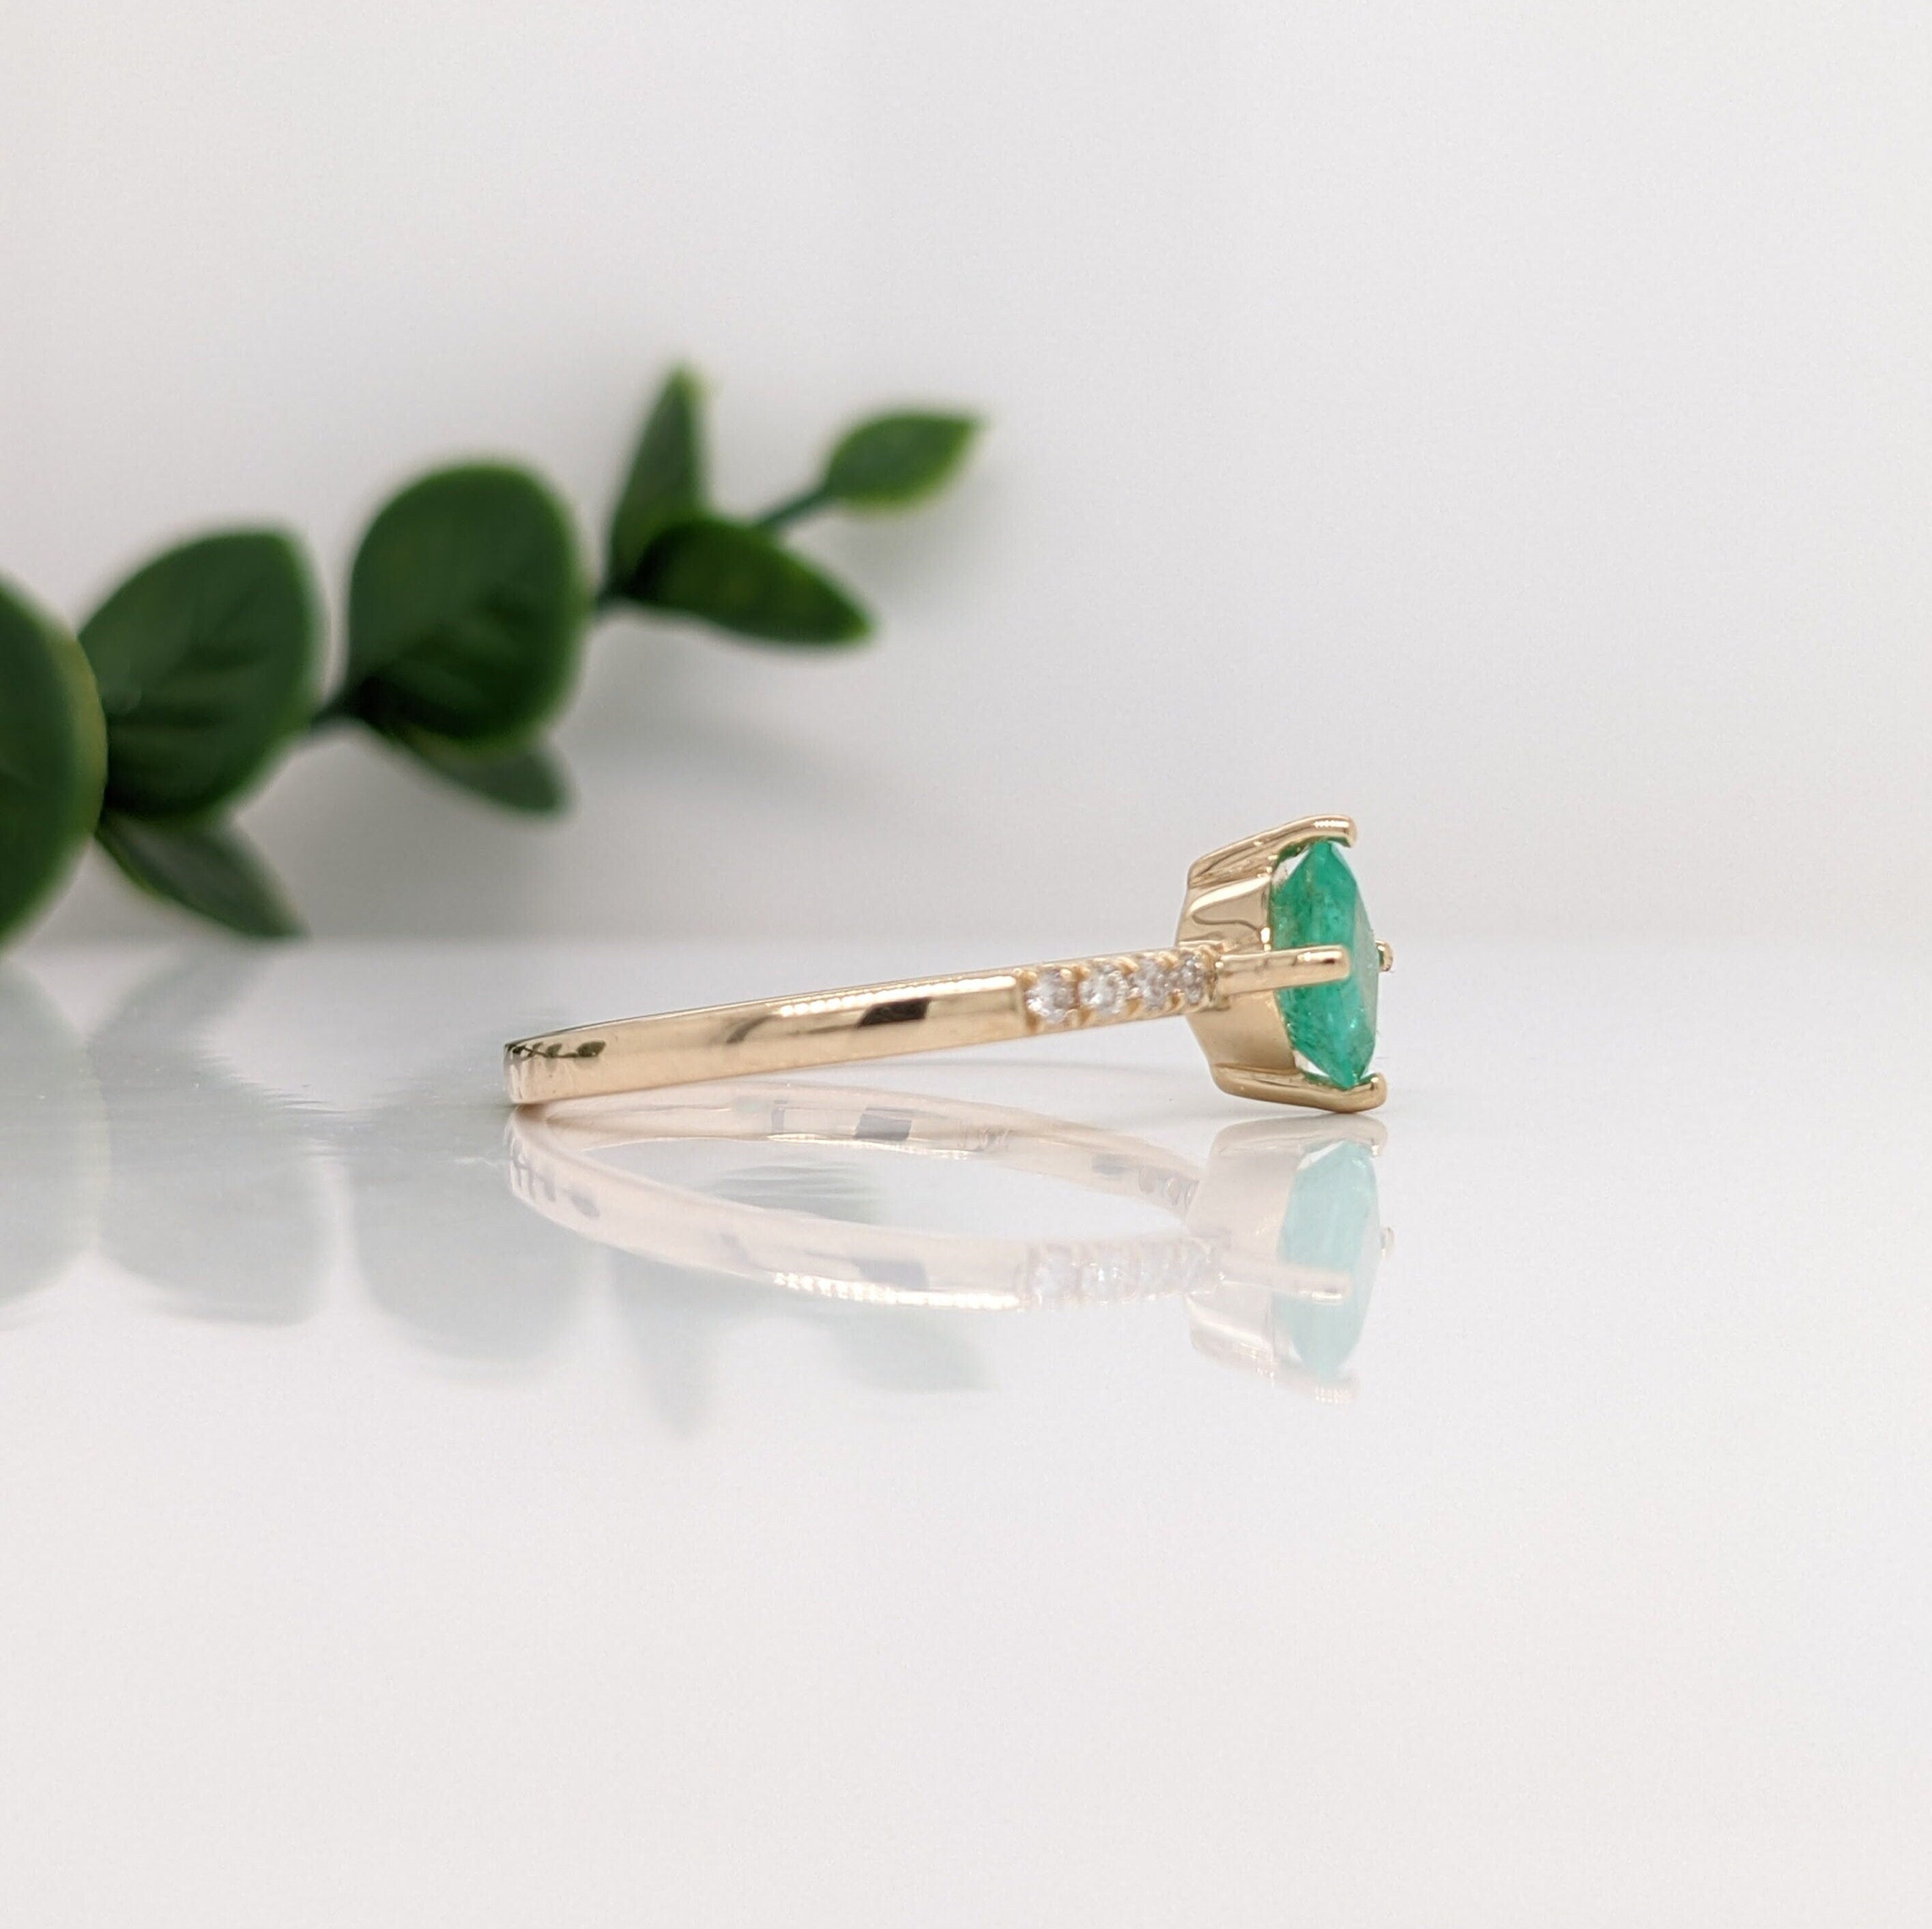 Glowing Bright Green Emerald Ring in 14k Yellow Gold w/ Natural Diamond Accents | Ascher Cut 5mm | May Birthstone | Compass prongs | Dainty